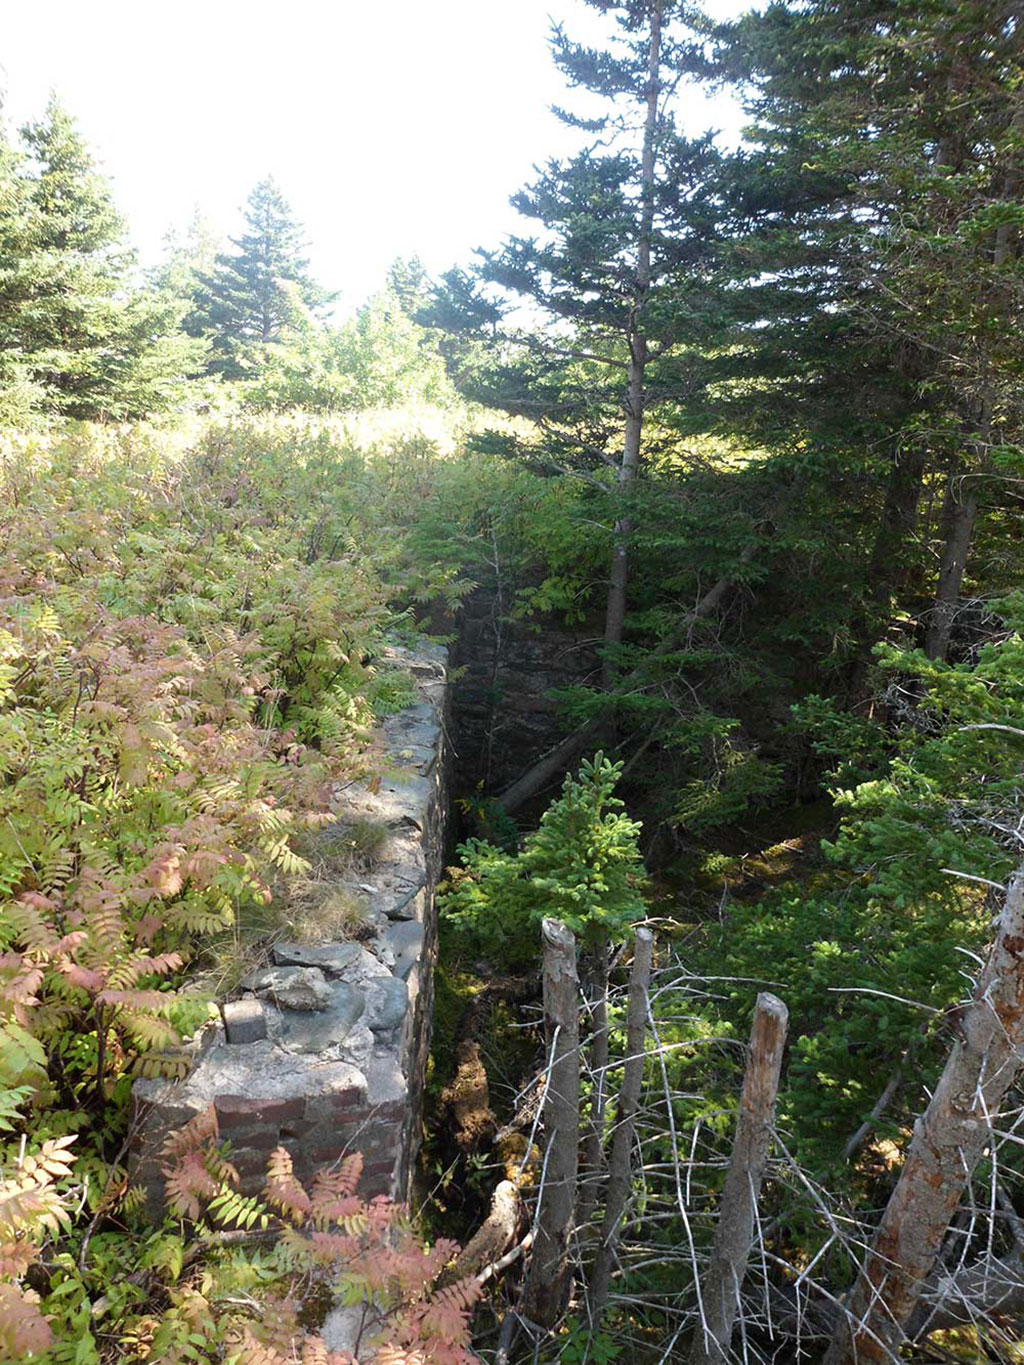 Stone wall in the forest, surrounded by ferns and trees.